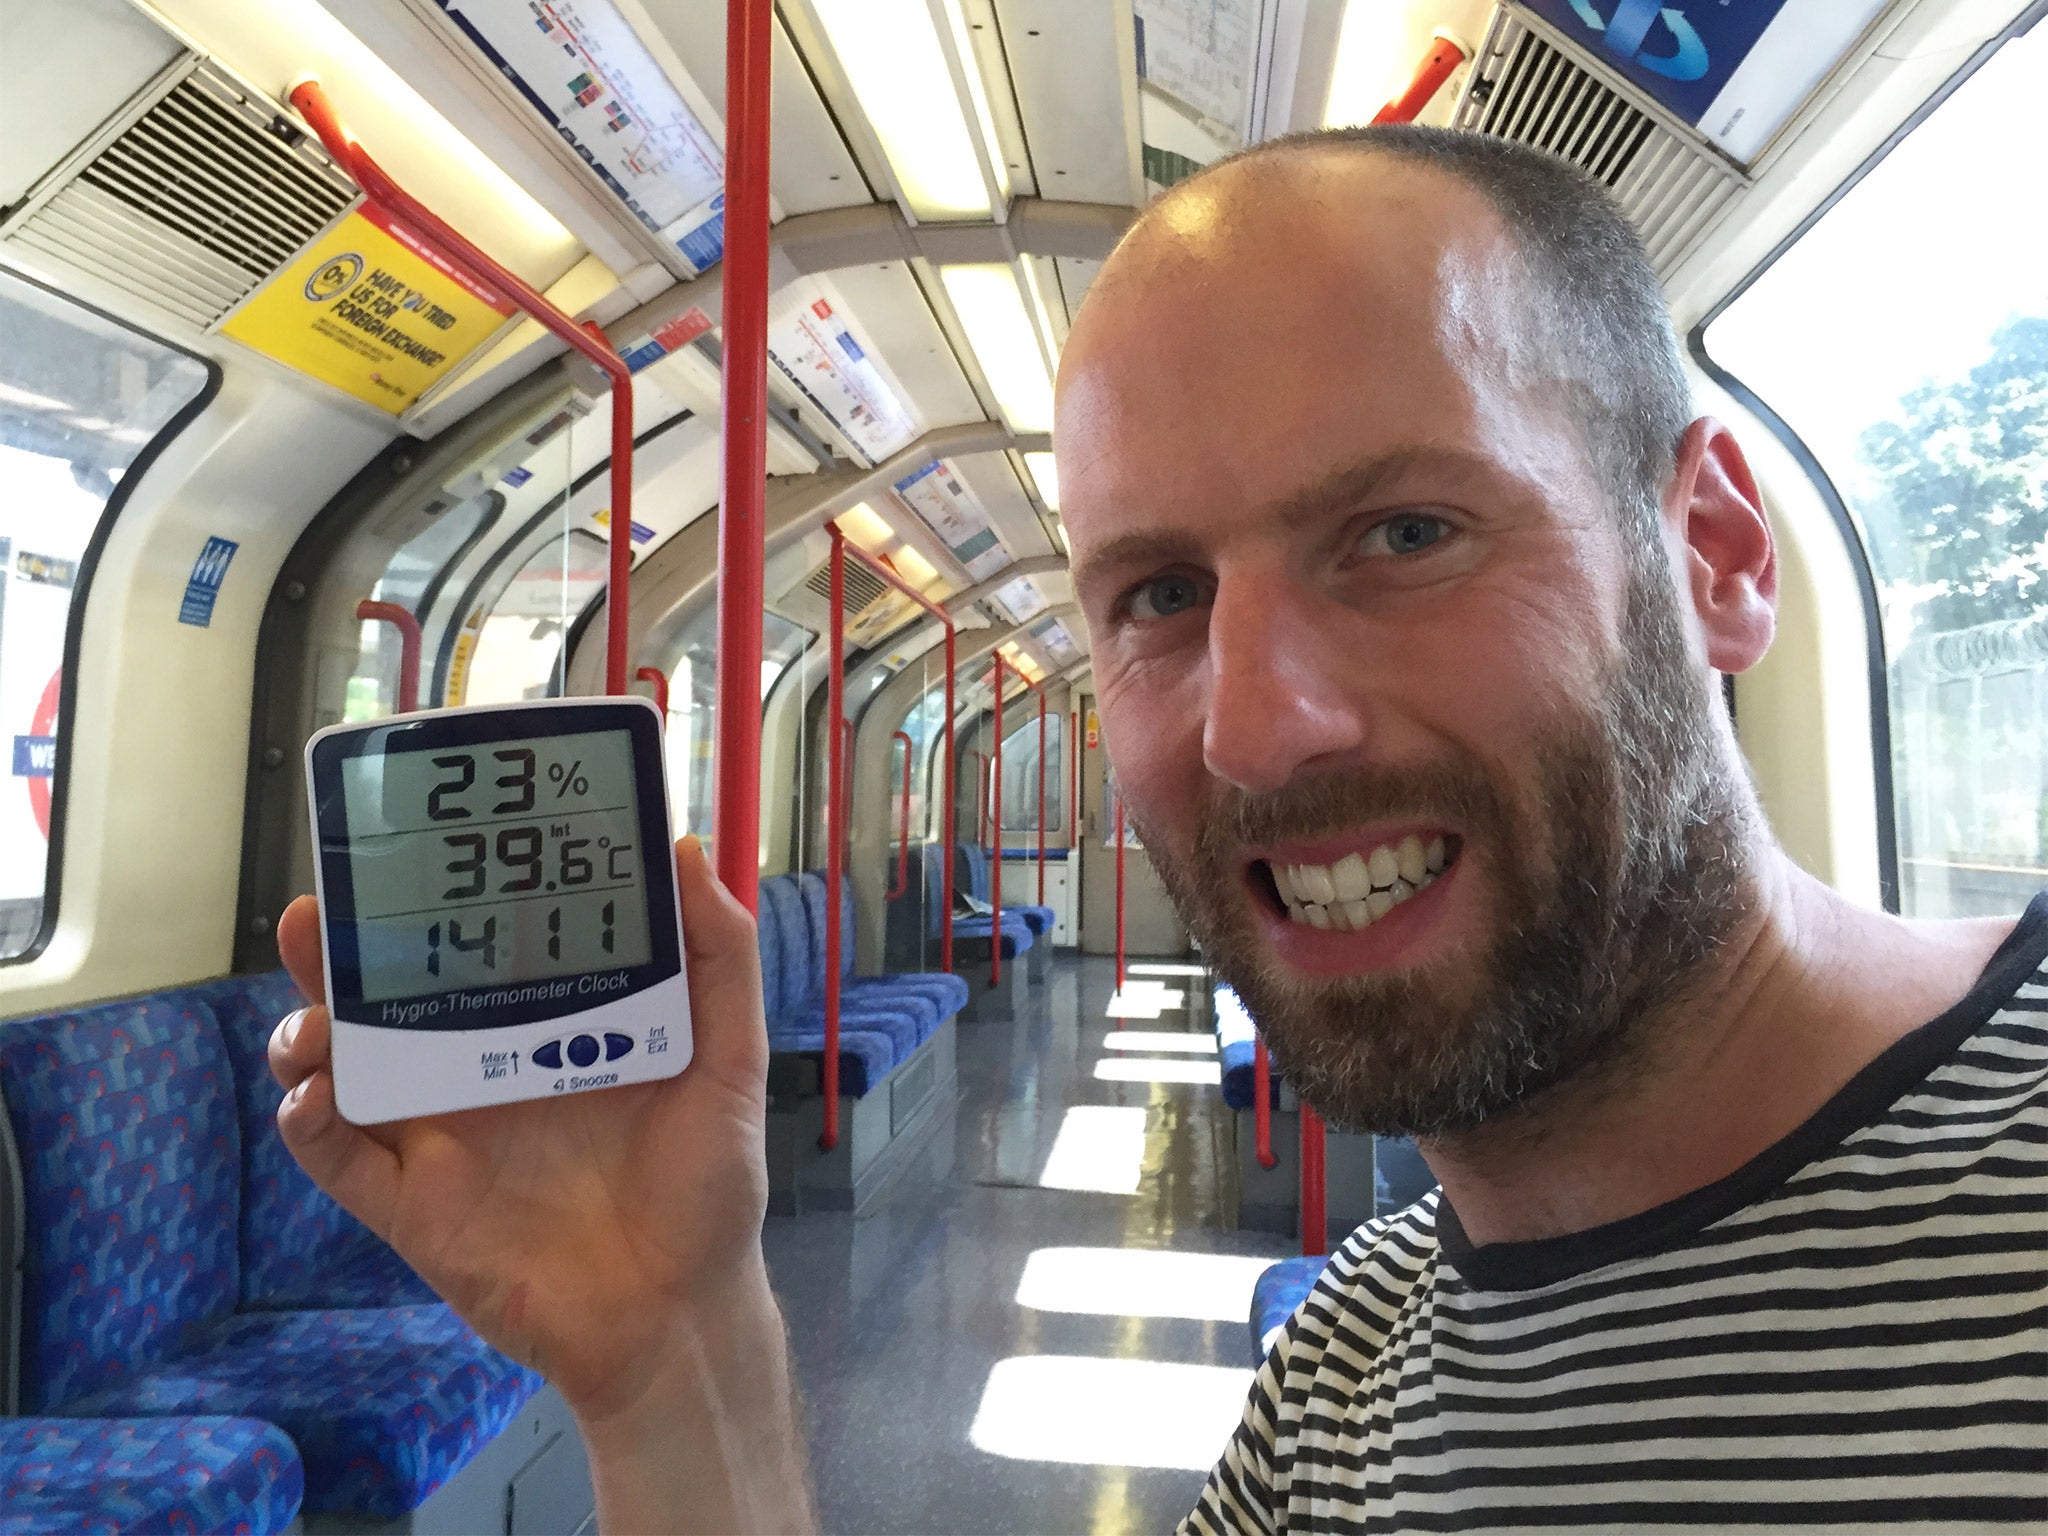 It's getting hot in here: Writer Simon Usborne's thermometer nearly hit 40 degrees